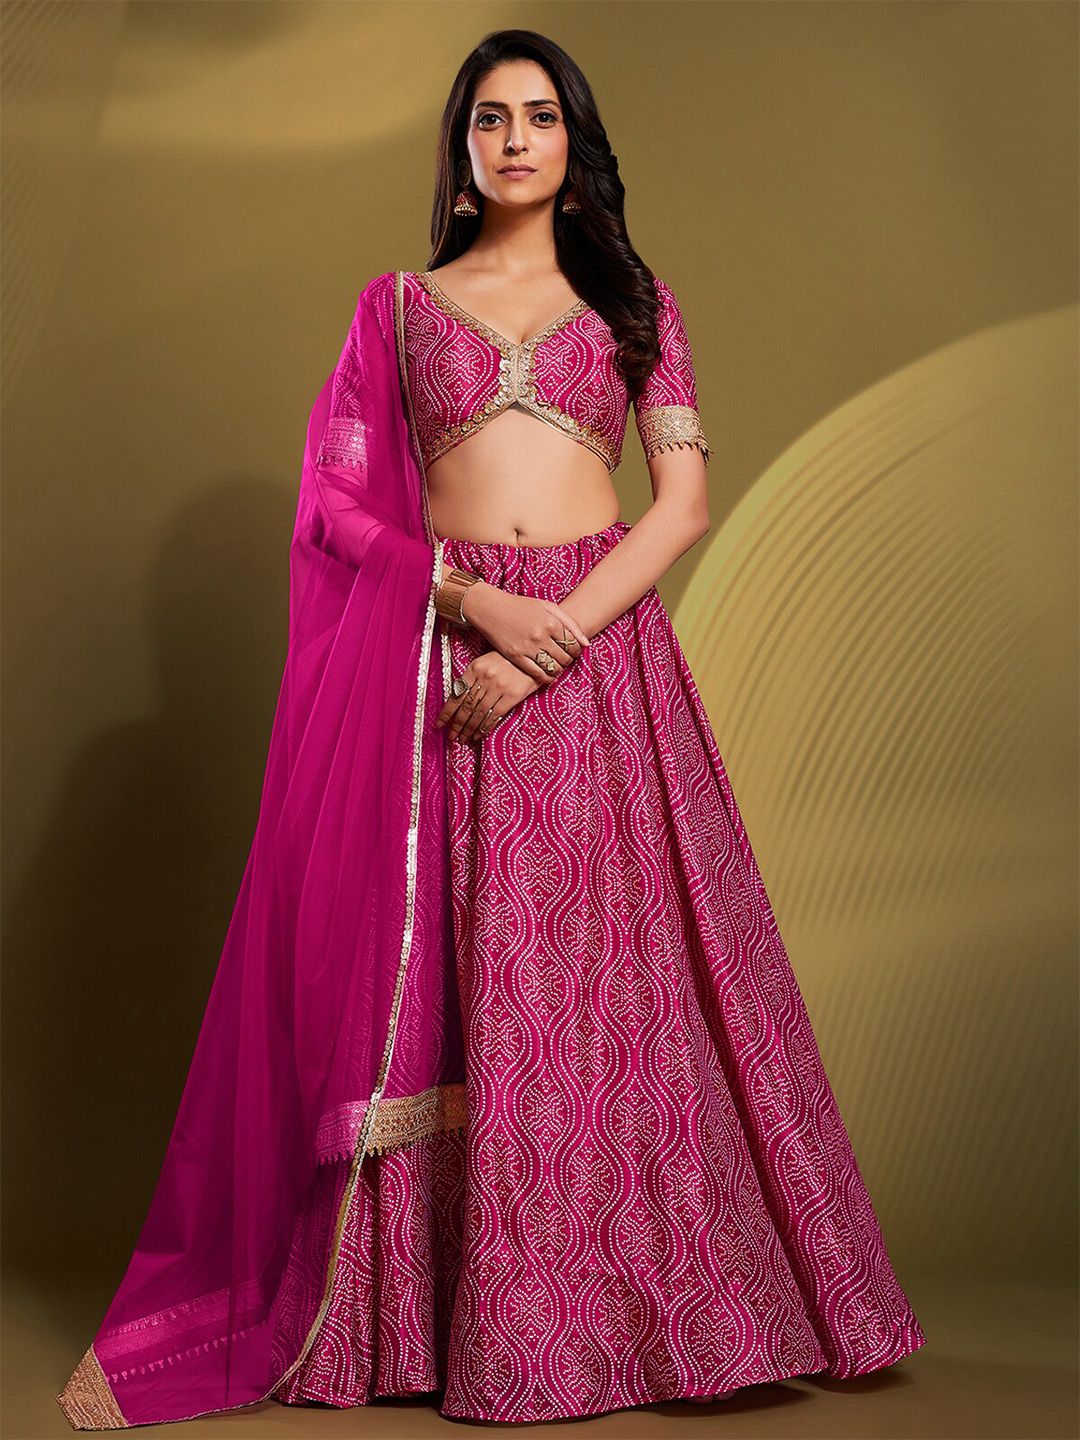 ODETTE Pink & Gold-Toned Printed Semi-Stitched Lehenga & Unstitched Blouse With Dupatta Price in India